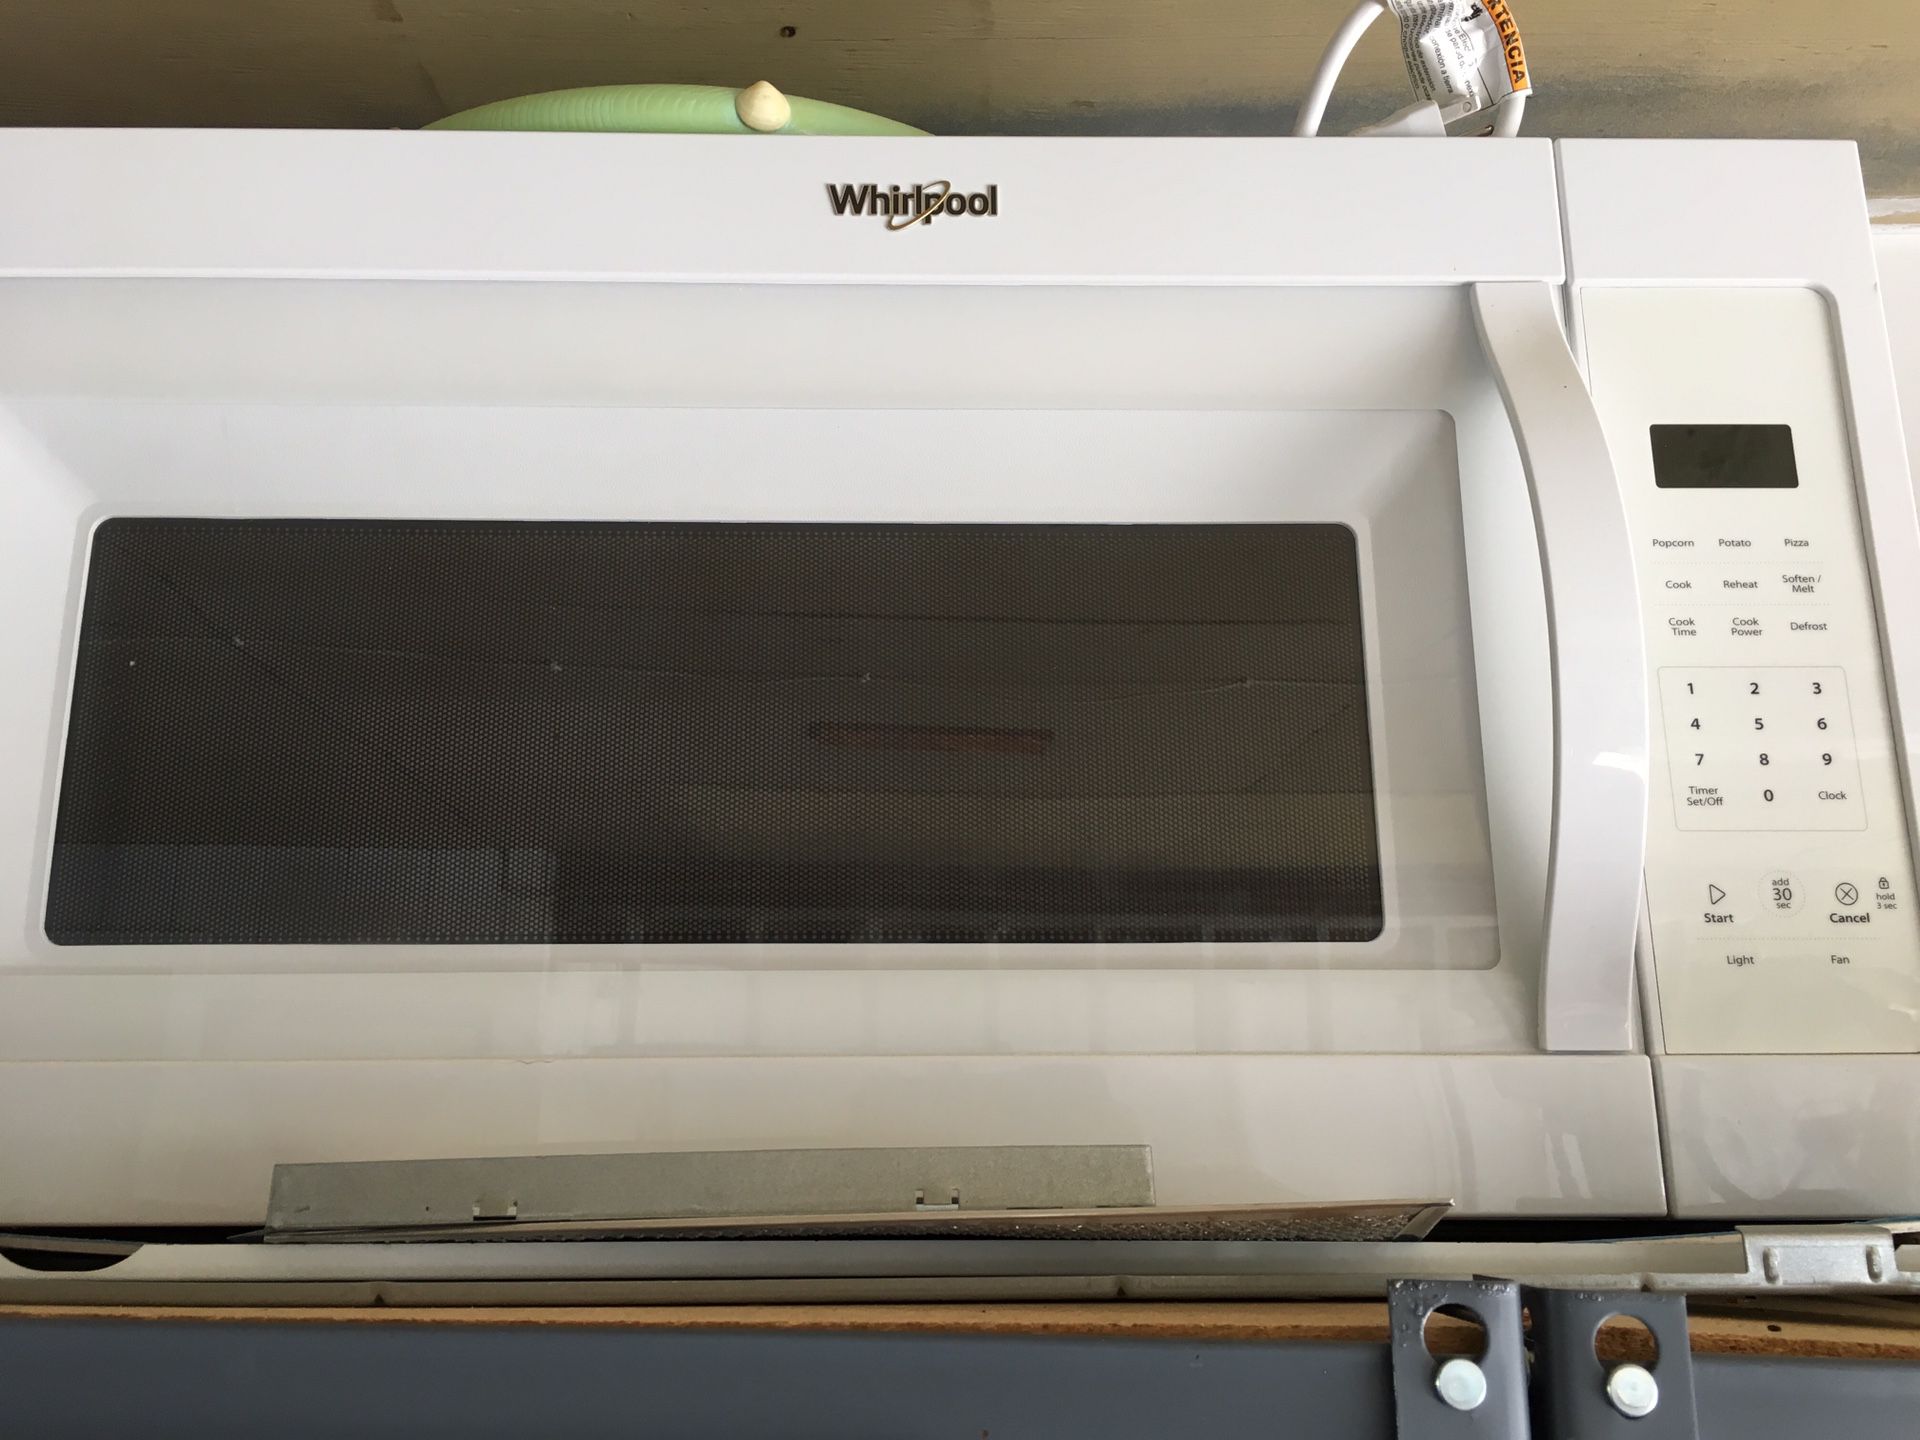 Whirlpool microwave with wall mount bracket